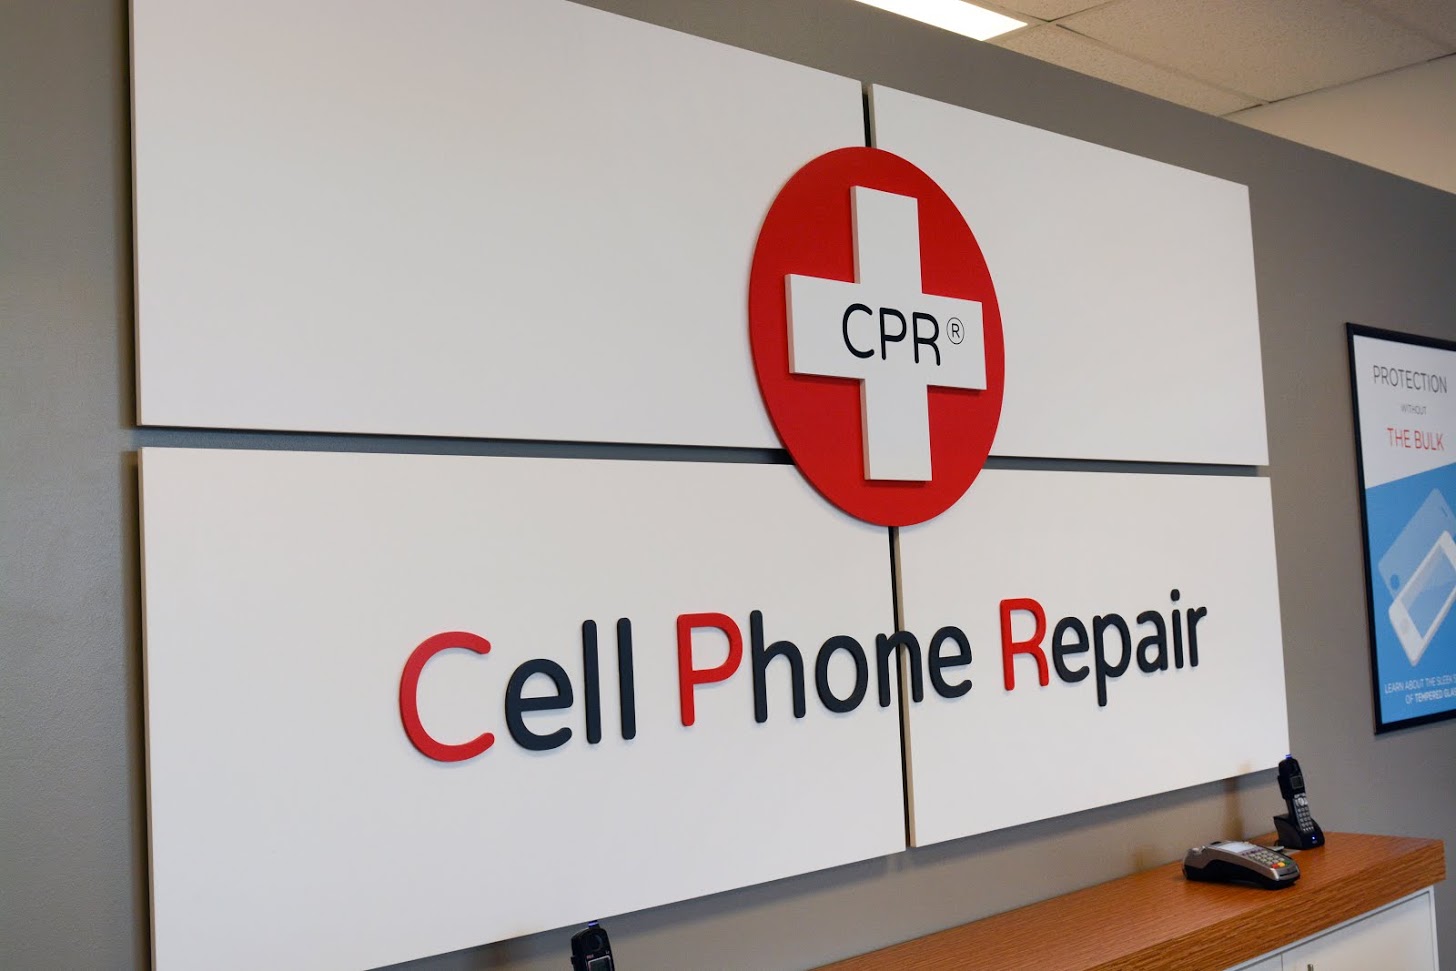 CPR Cell Phone Repair, Tuesday, April 30, 2019, Press release picture